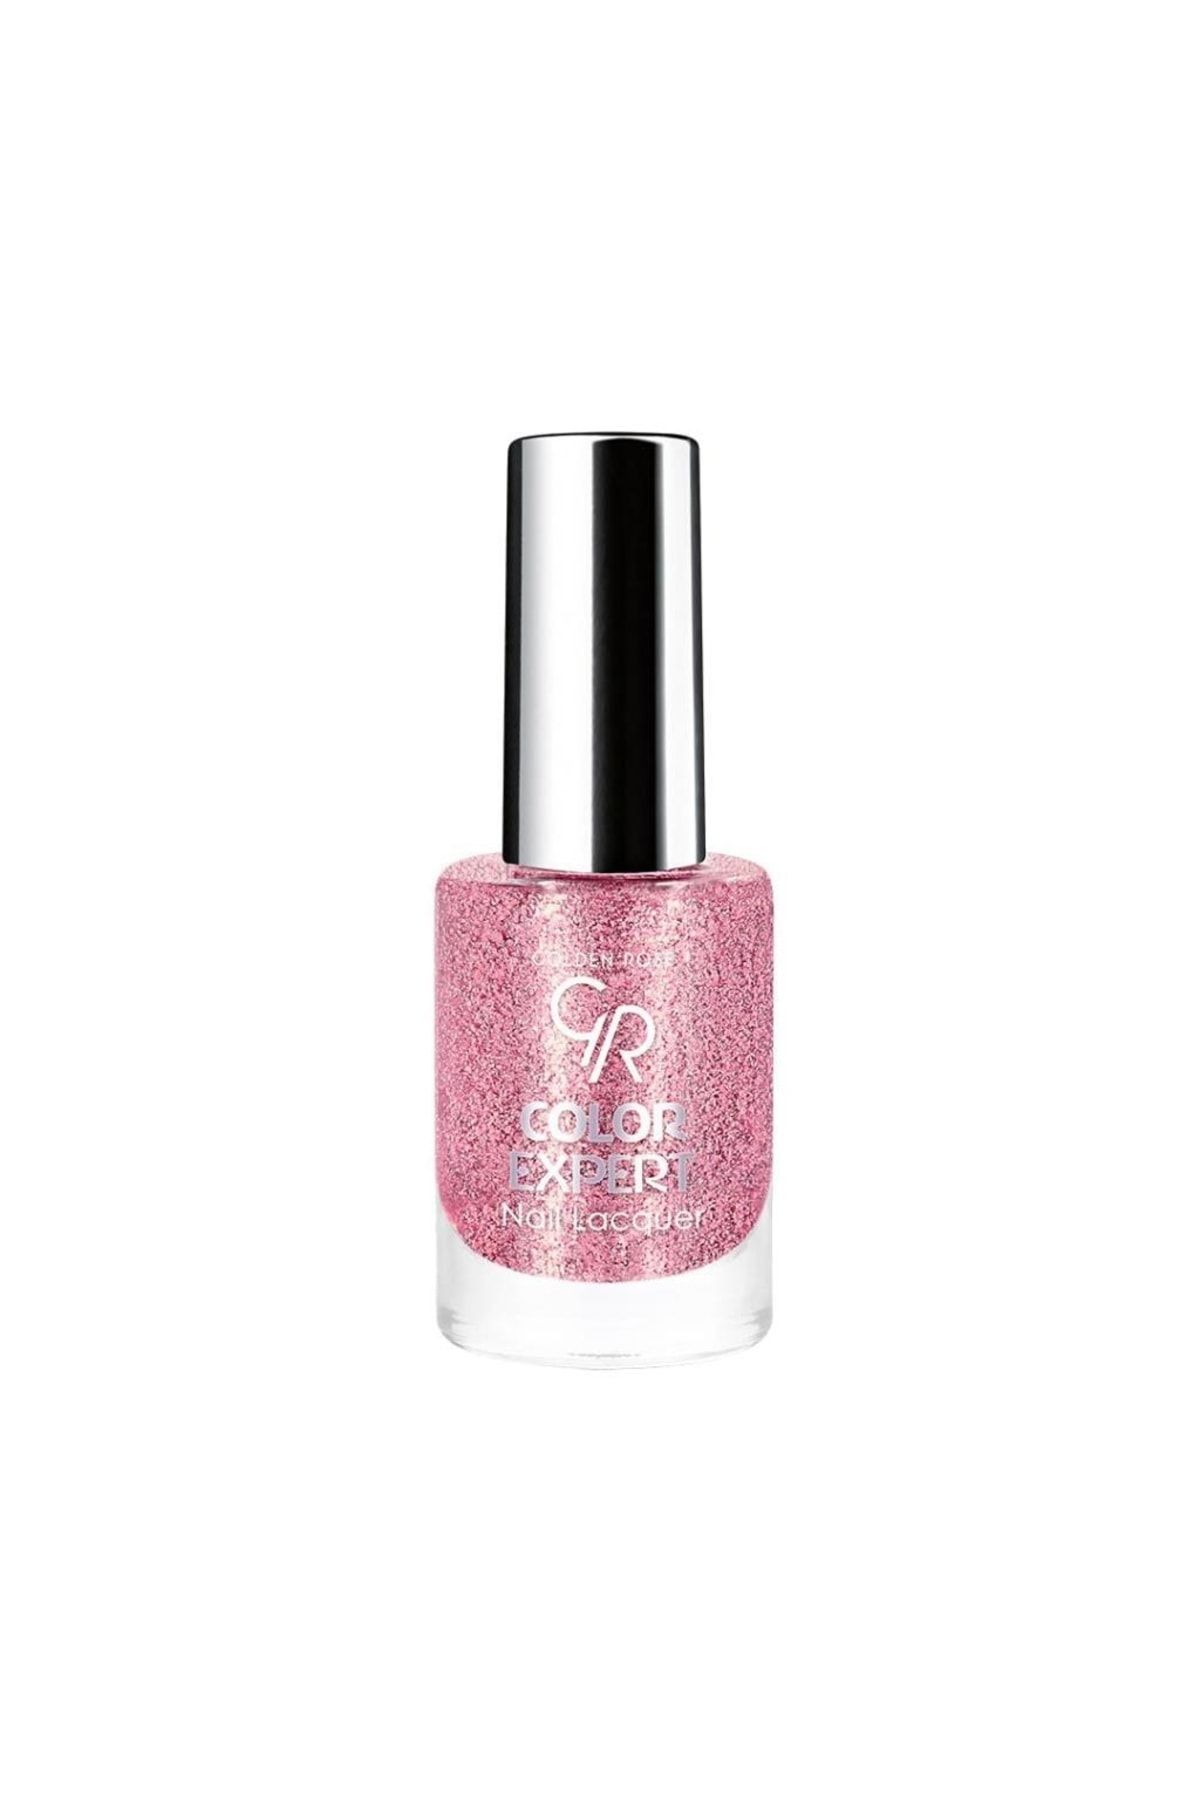 Golden Rose Oje Color Expert Nail Lacquer 607